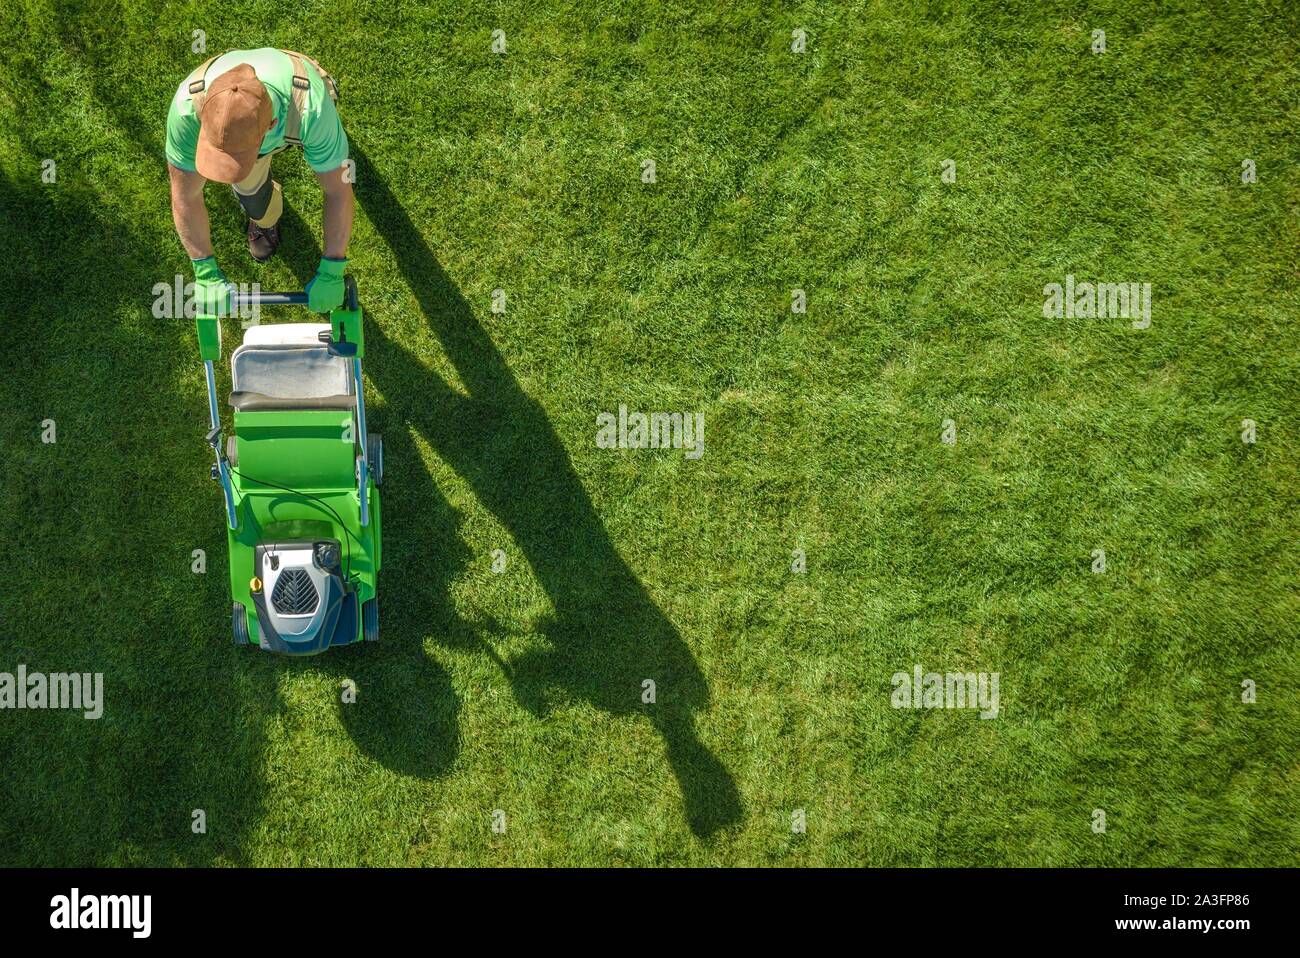 Lawn Moving Aerial Photo. Caucasian Gardener with Gasoline Grass Mower at Work. Landscaping Business. Industrial Theme. Stock Photo